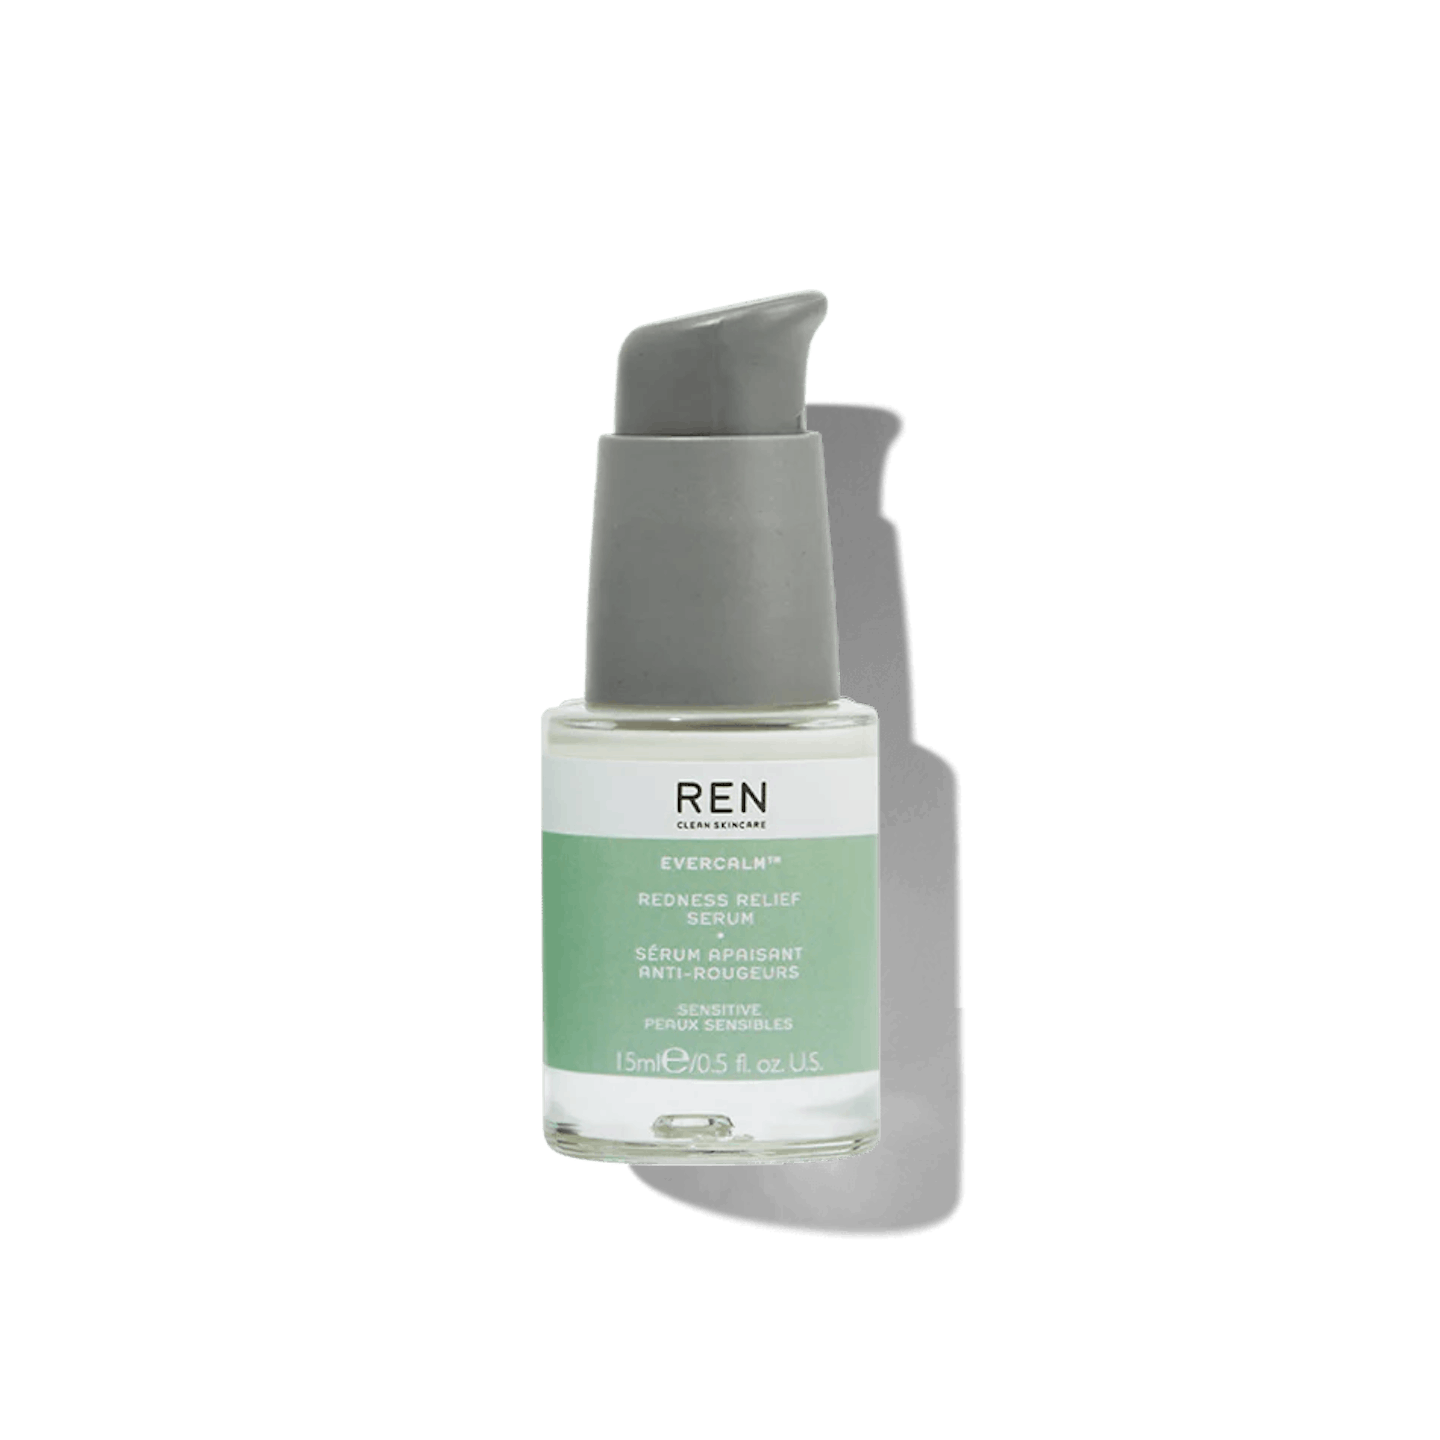 ren a solution to redness